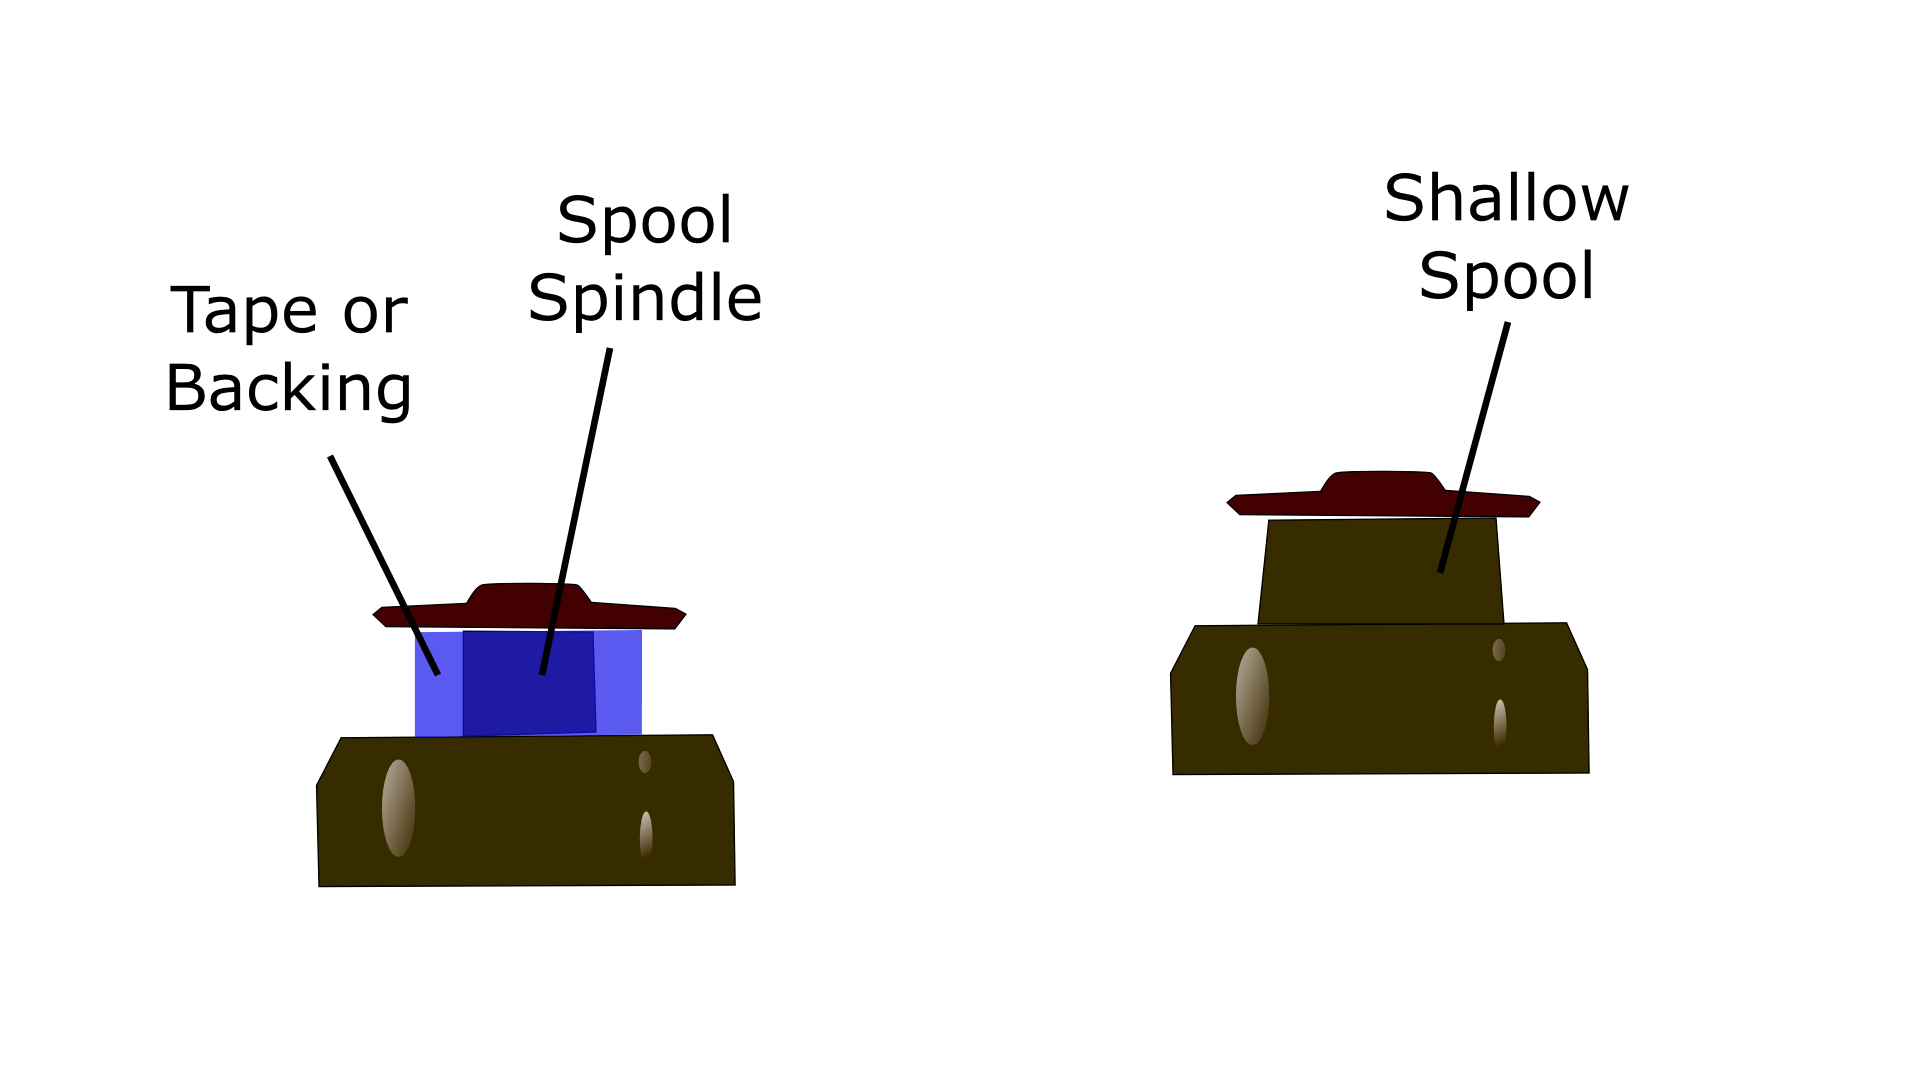 How much fishing line on a spool - benefits of a shallow spool